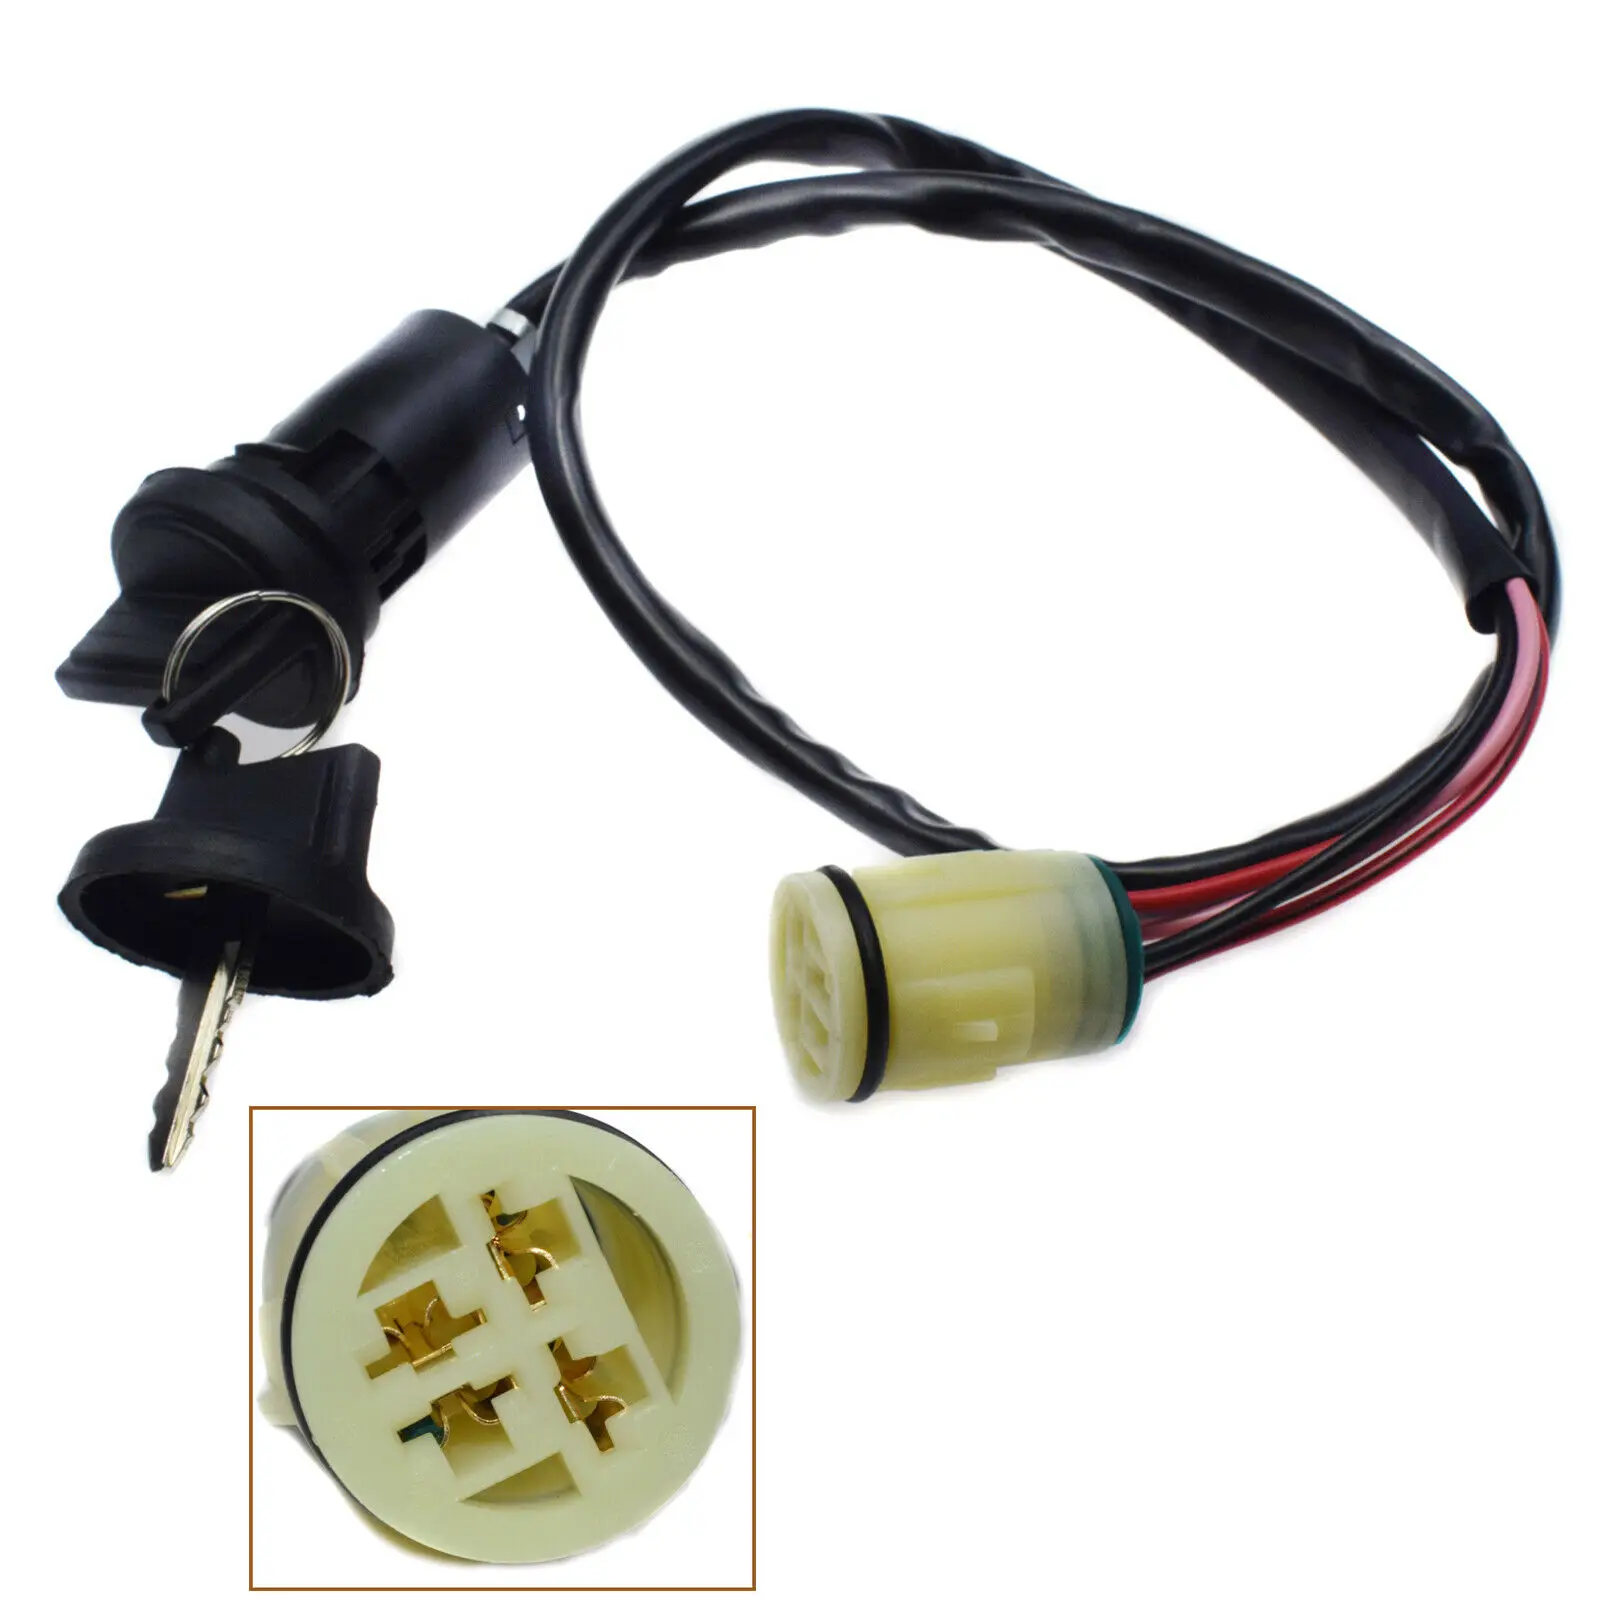 Motorcycle ATV Ignition Key Switch For Honda 15-20 Foreman 500 520 & Rancher 420 See Notes T162 Ignition Key Switch motorcycle electric door lock 4 wires plug ignition key switch for honda trx350fe trx350fm trx350te trx400fga trx420 rancher es